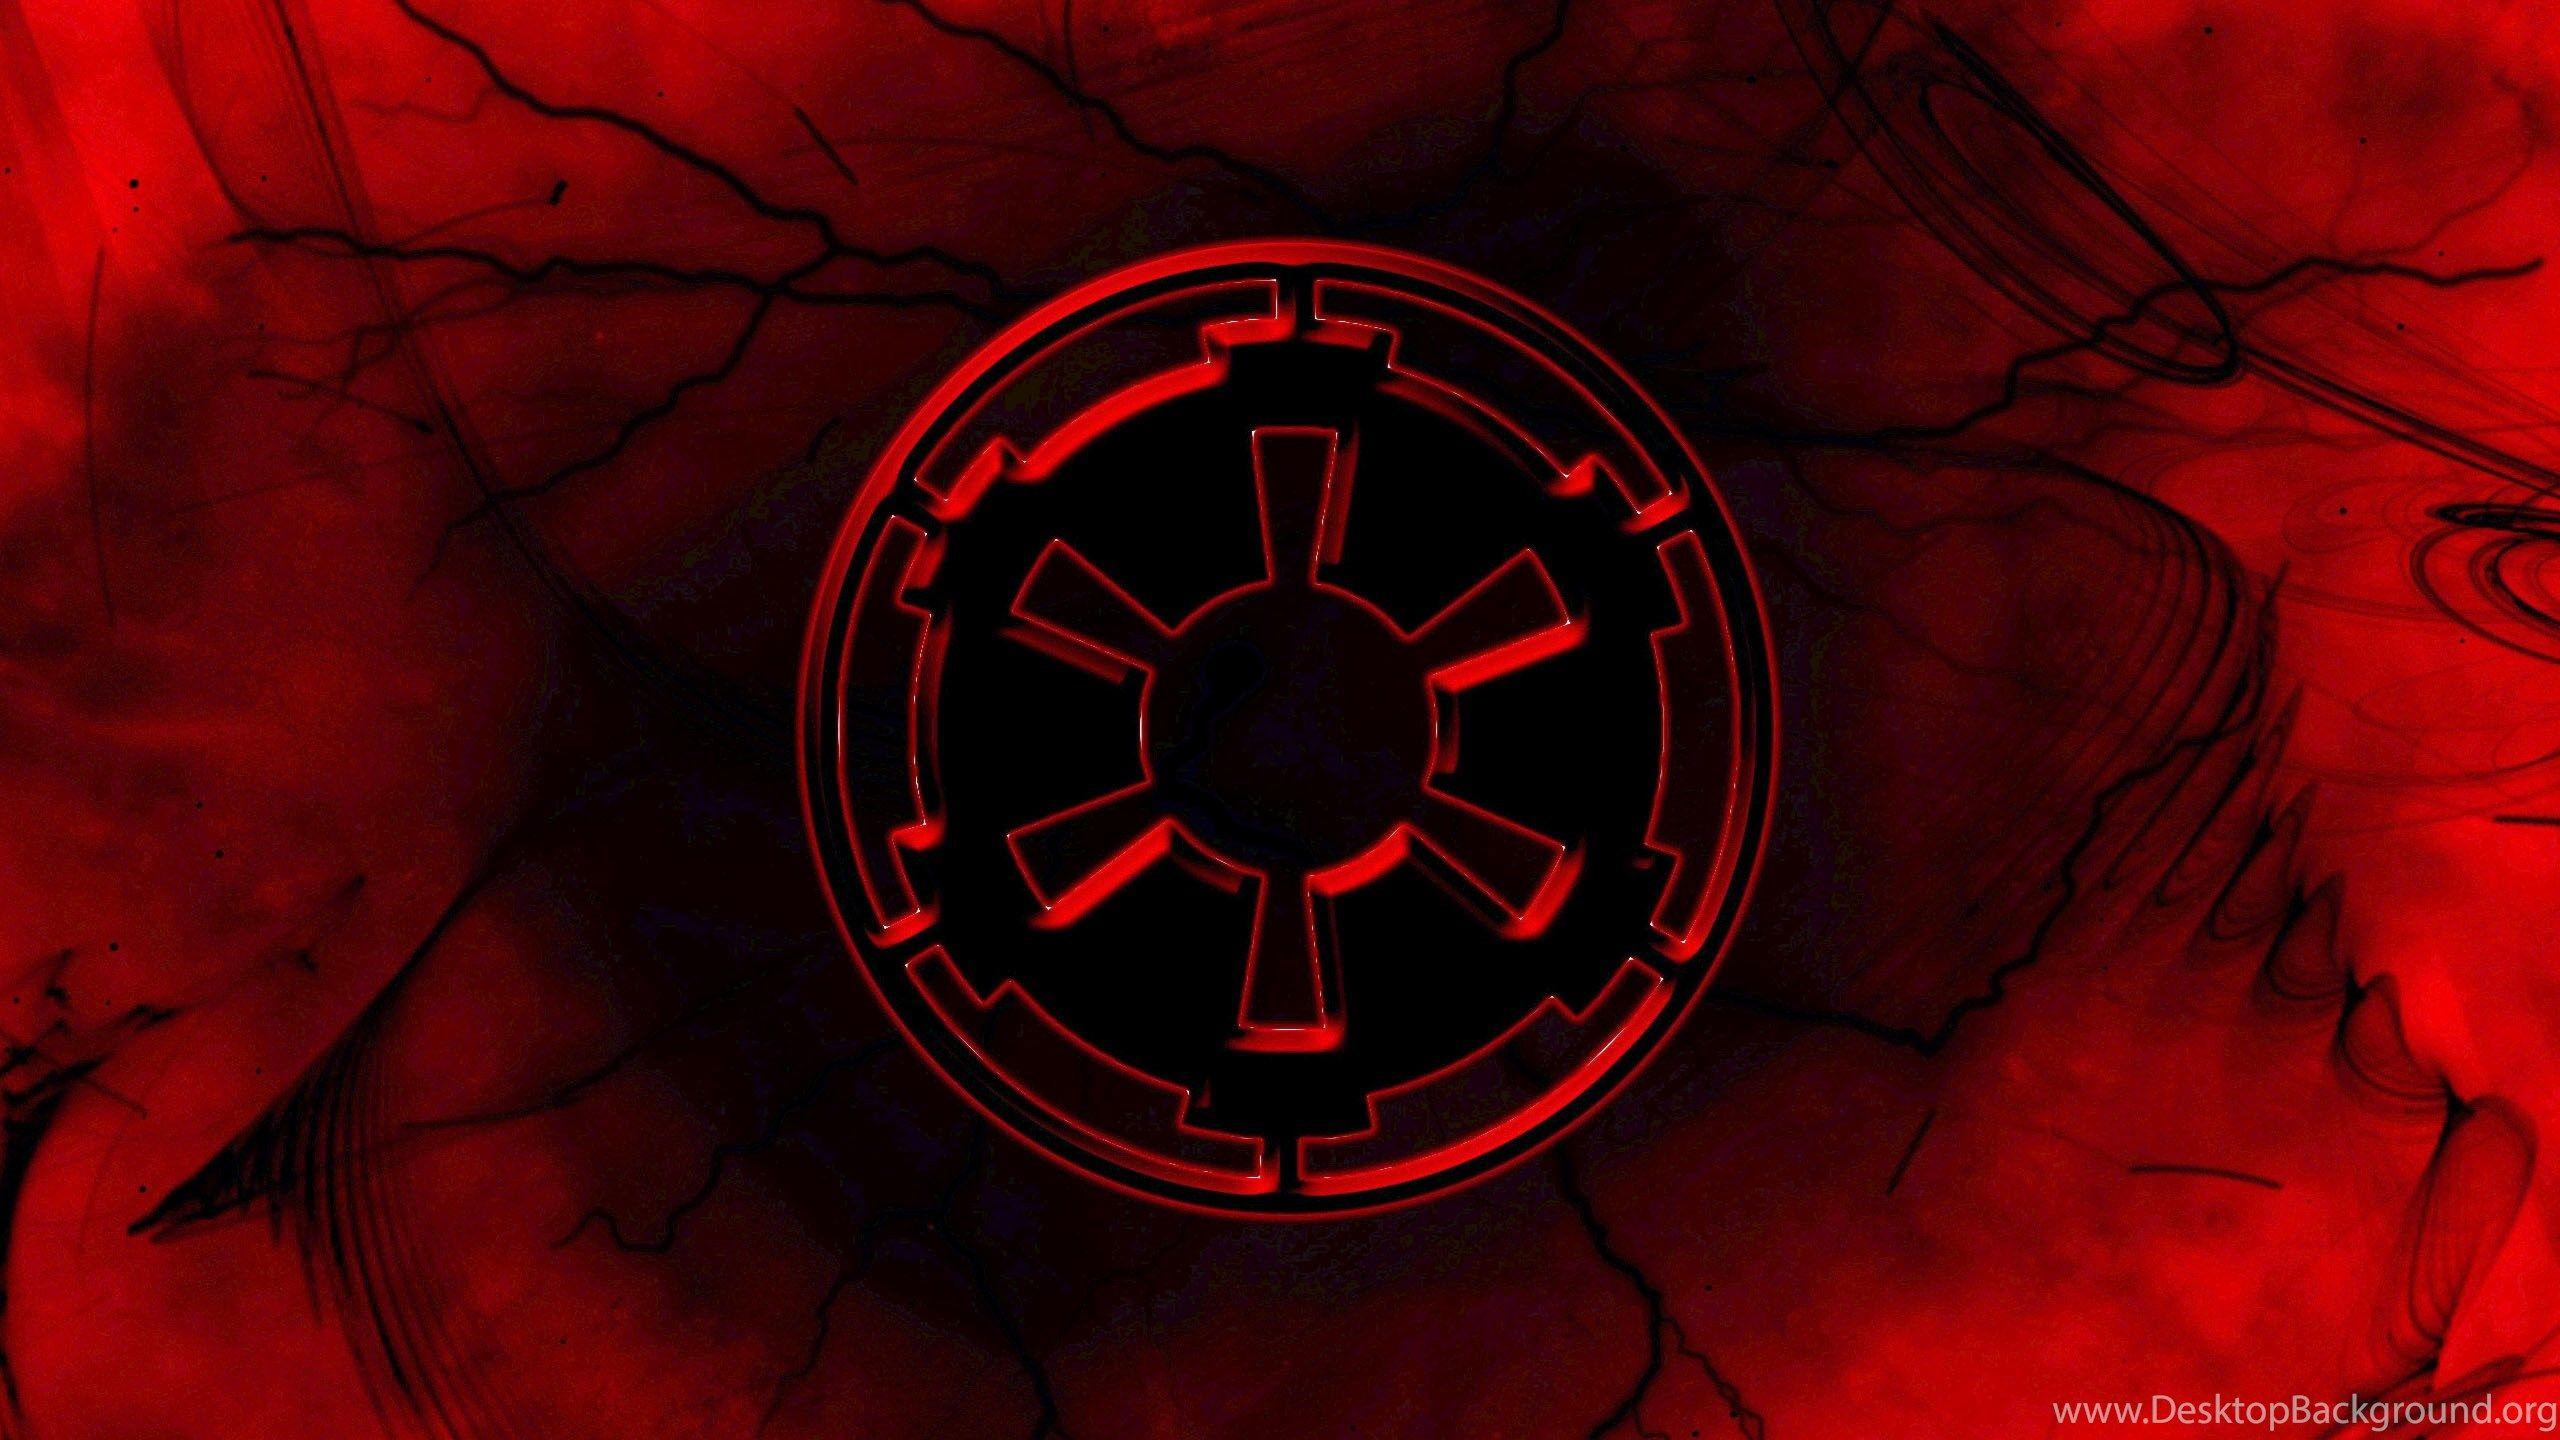 Star Wars Imperial Wallpapers - Top Free Star Wars Imperial Backgrounds